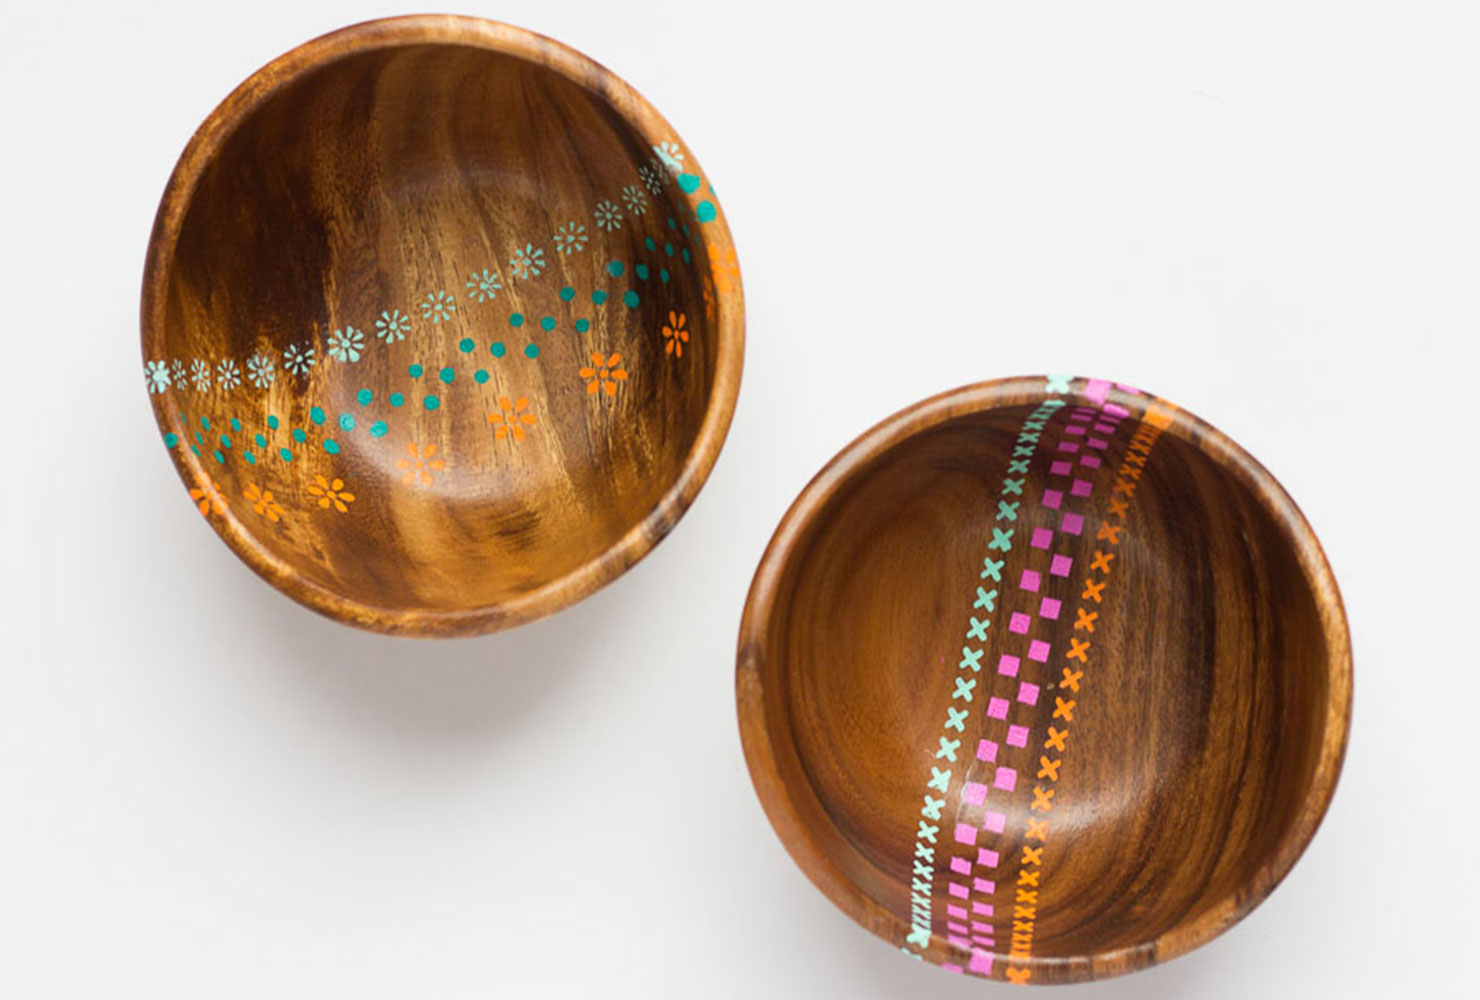 creative gift ideas painted wooden bowls500